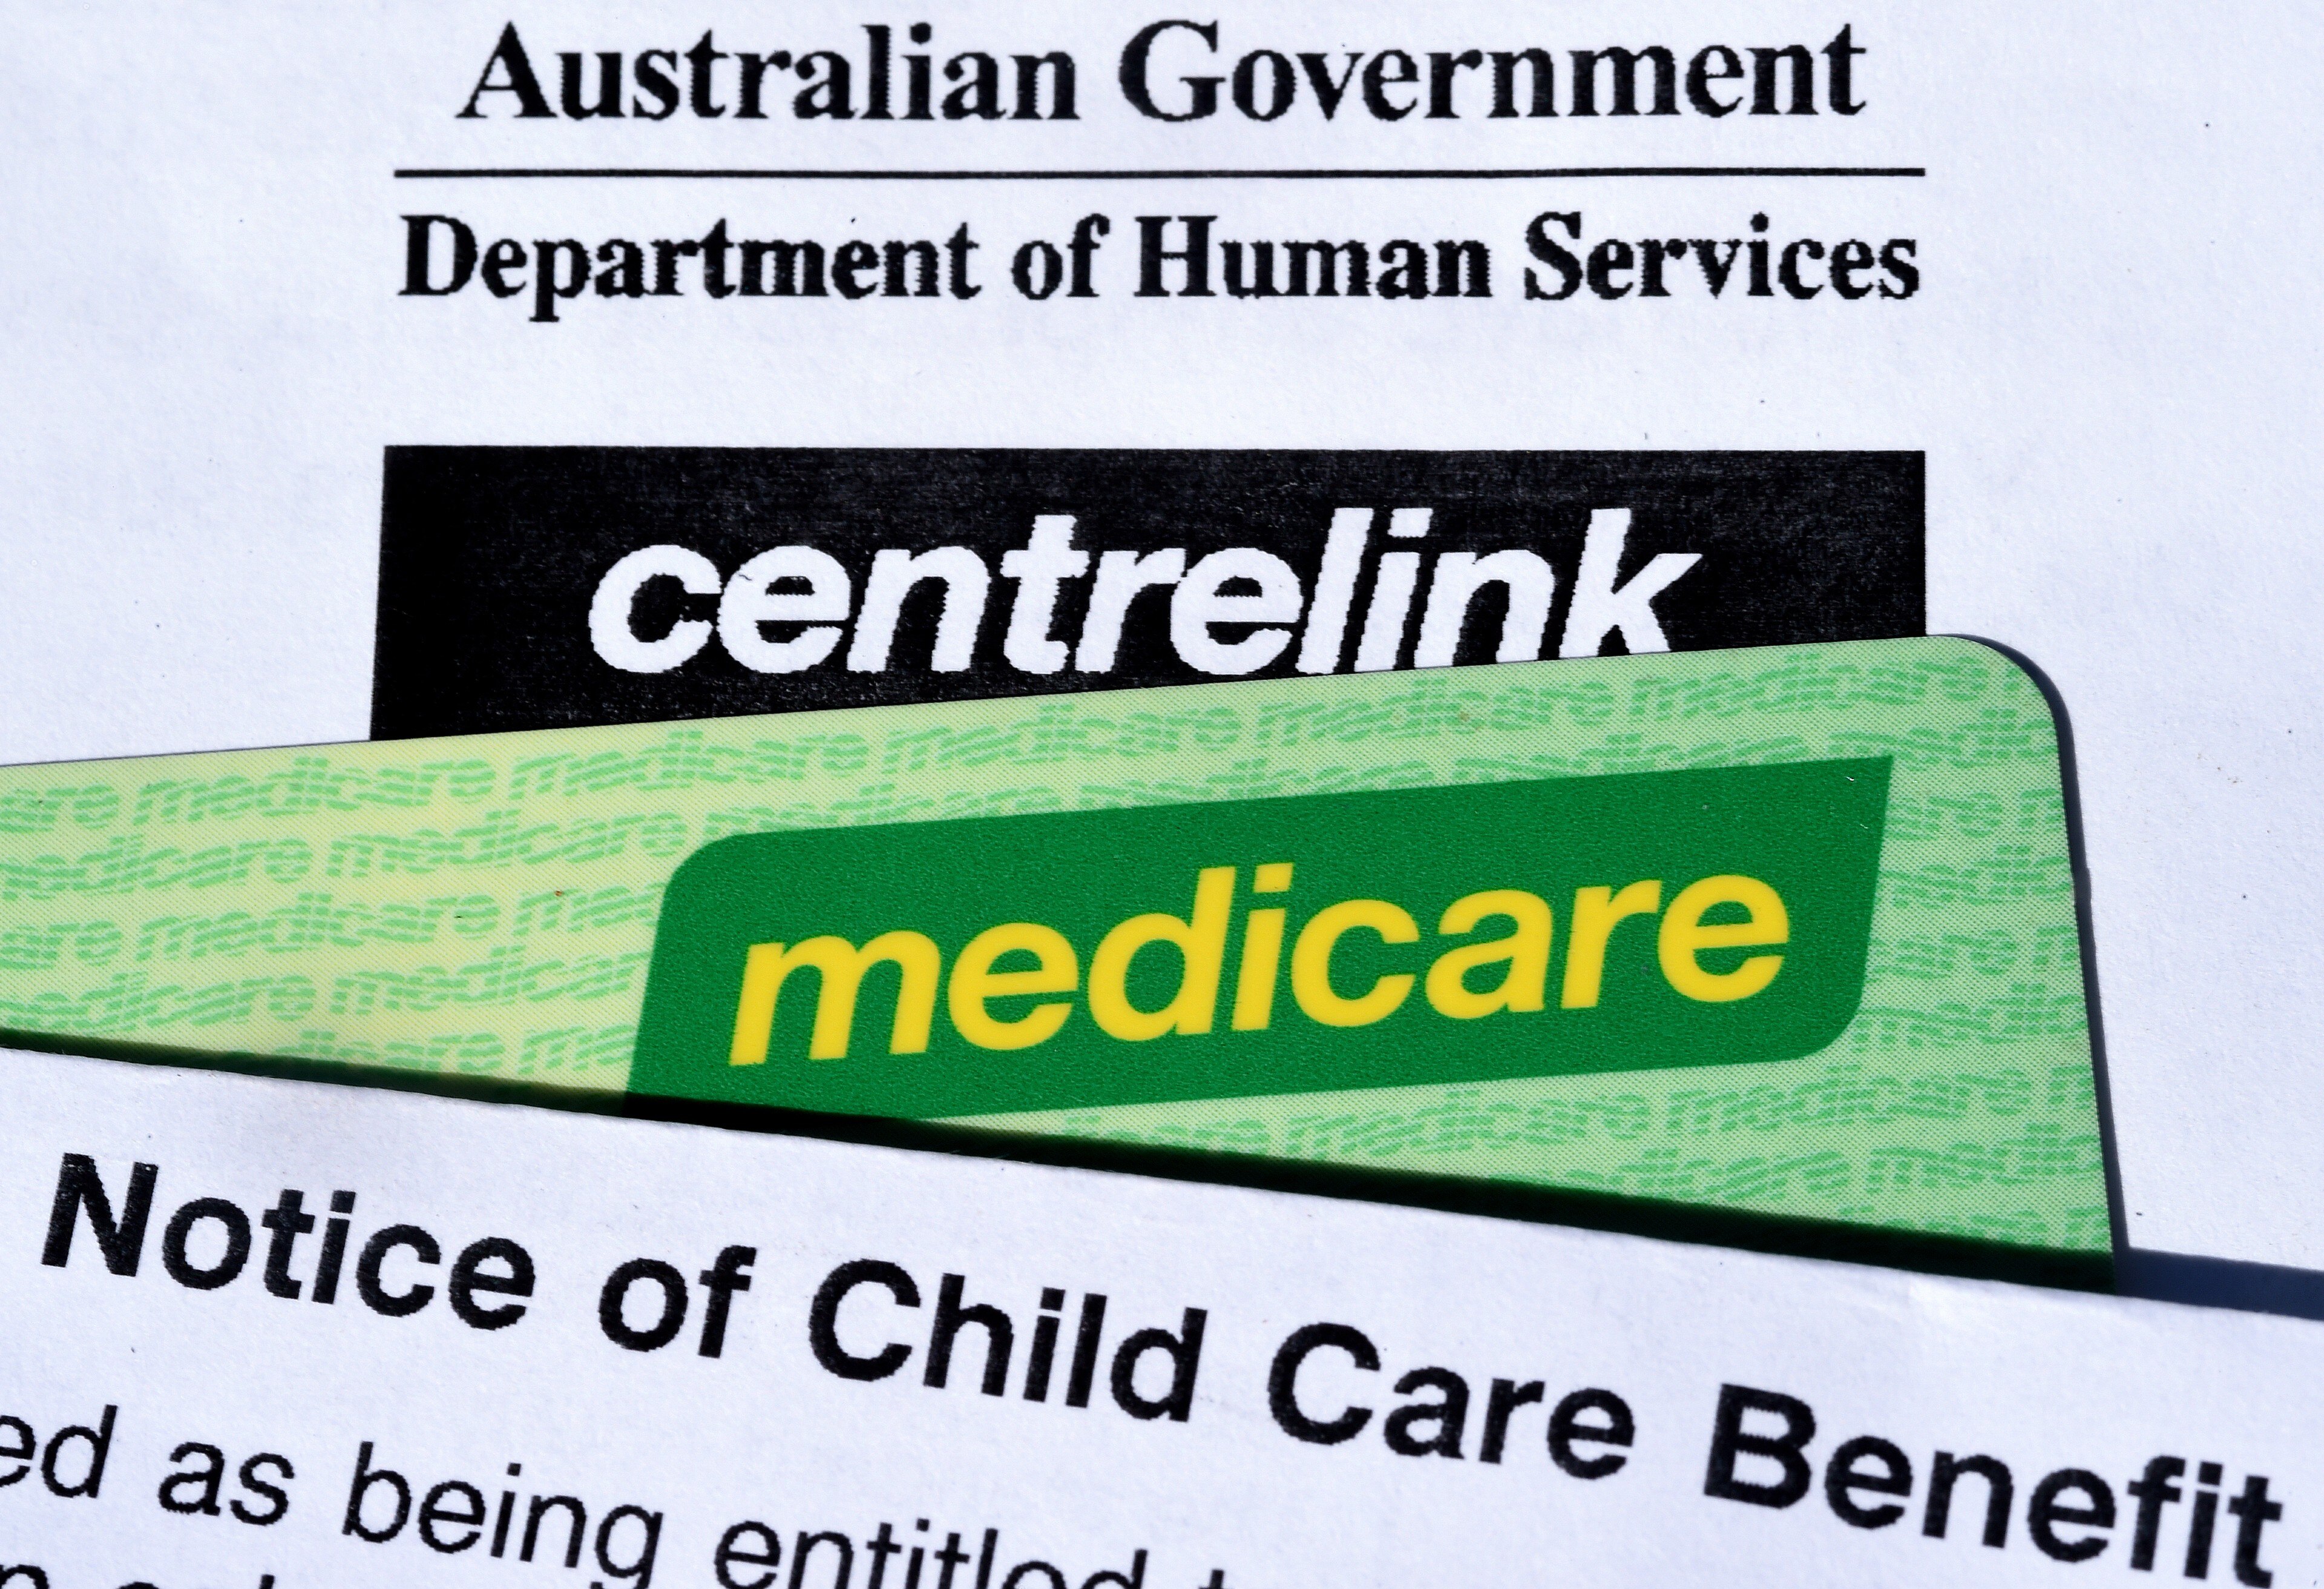 Stock photograph showing the Australian Government's Centerlink and Medicare branding.